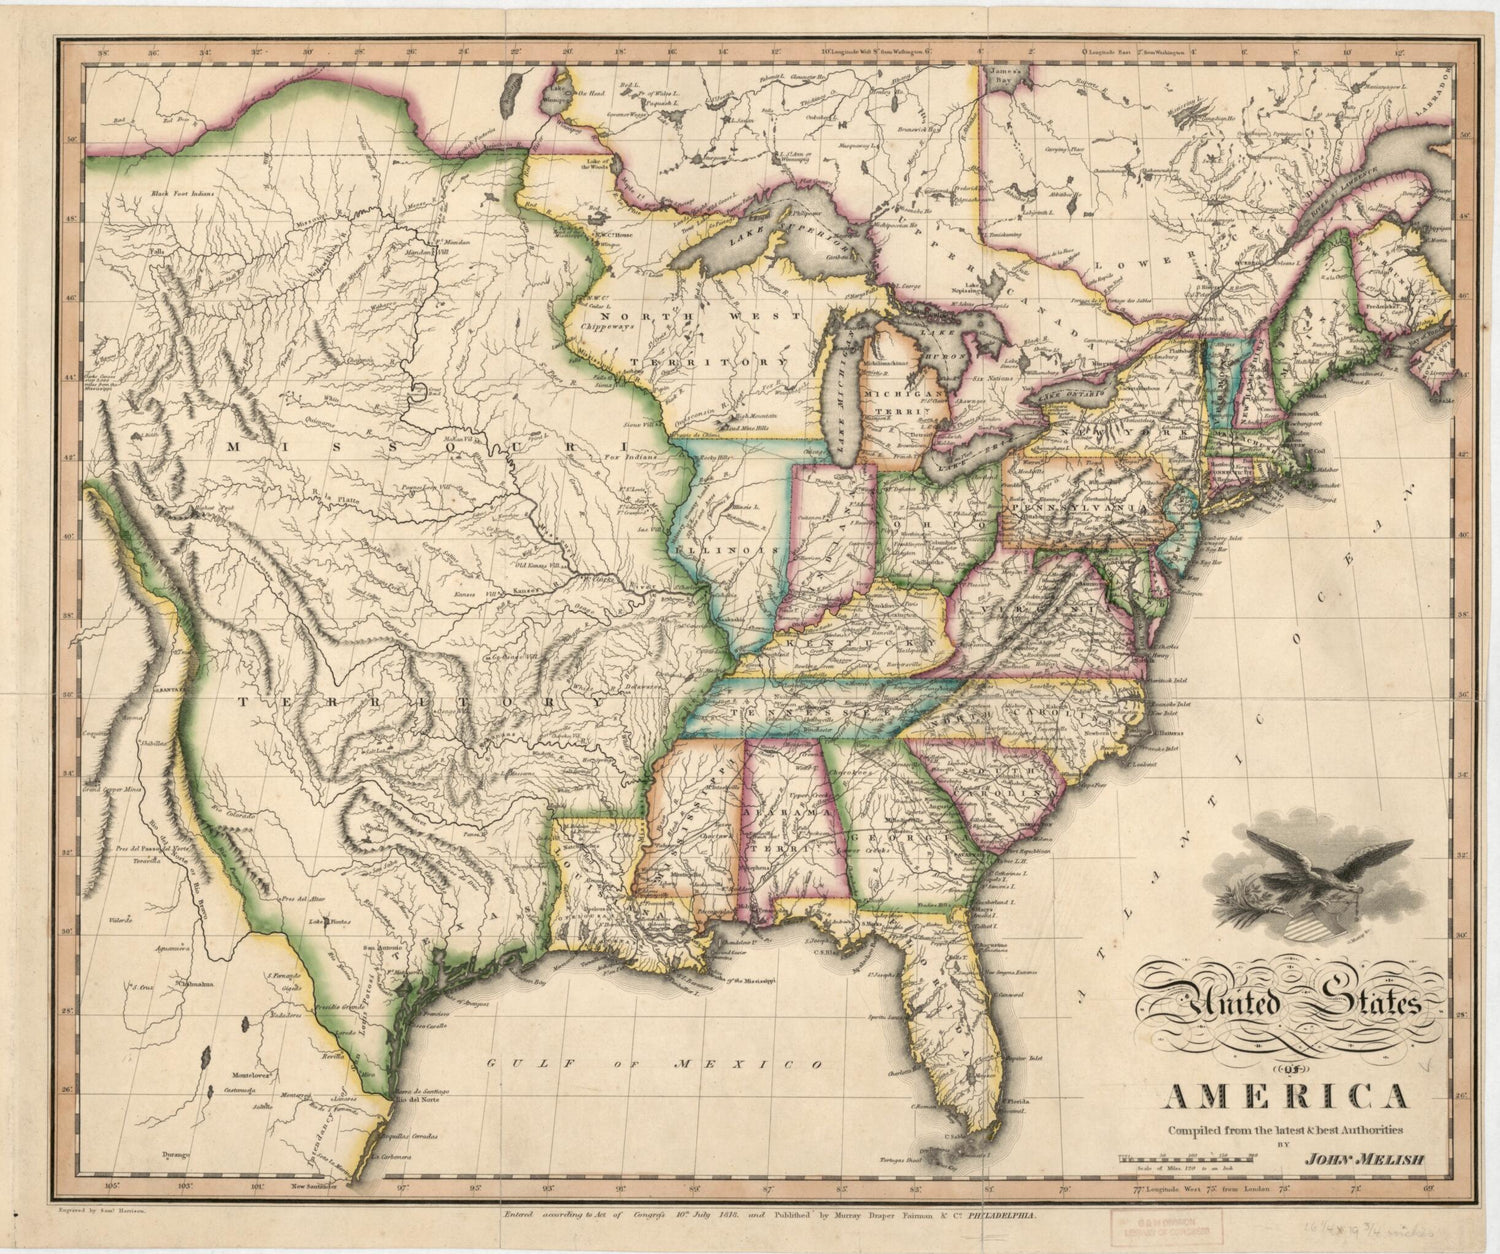 This old map of United States of America from 1818 was created by Samuel Harrison, John Melish, Draper Murray, George Murray in 1818